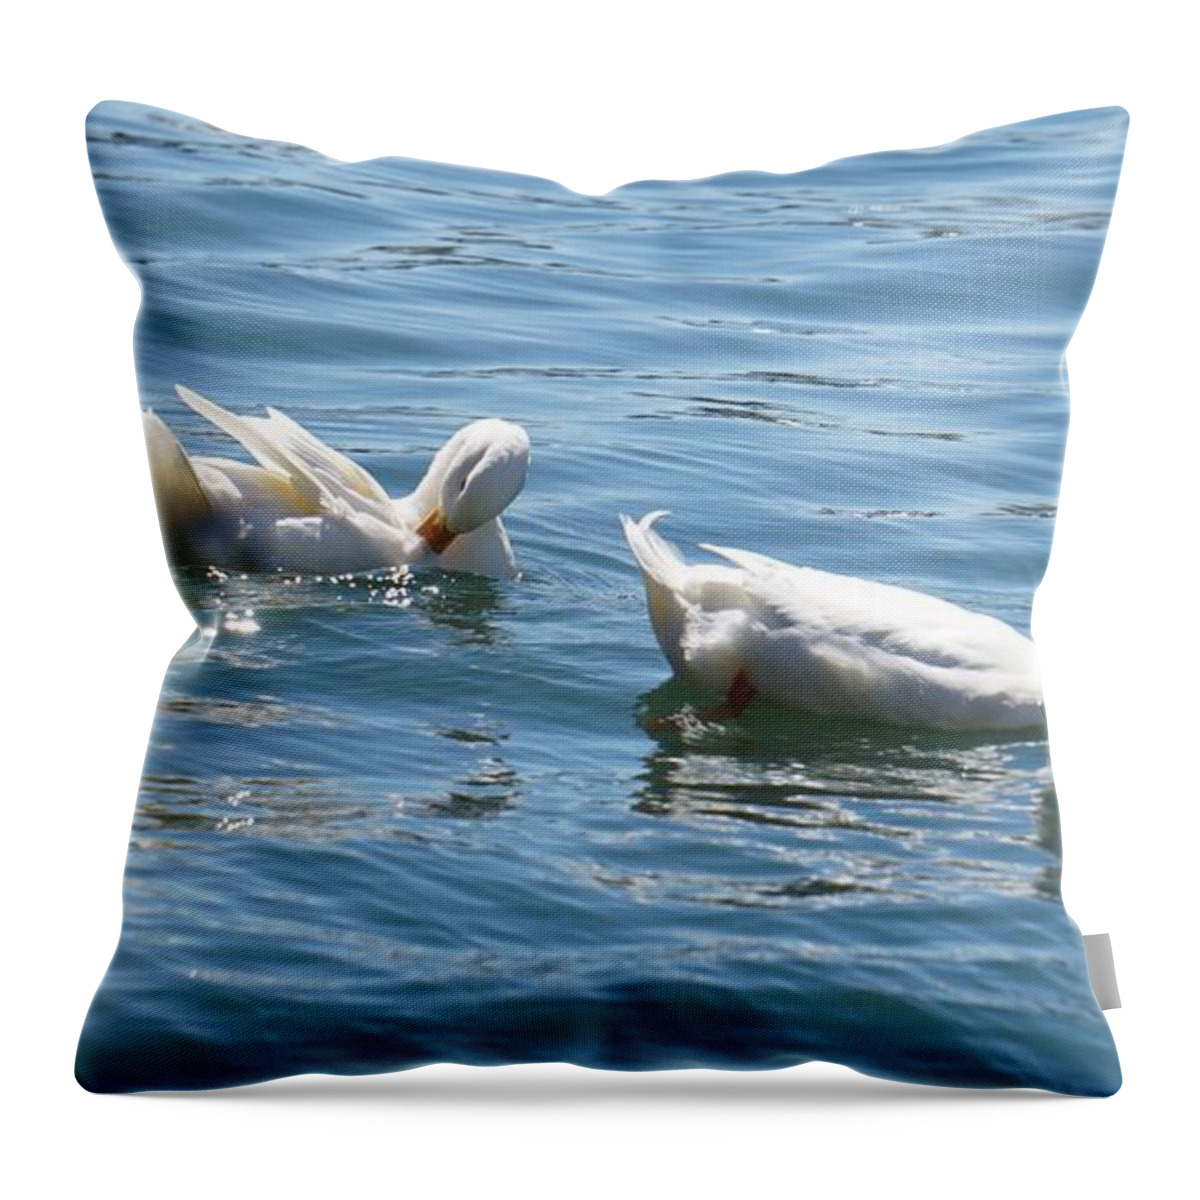  Throw Pillow featuring the photograph Beauty In The Water by Demetrai Johnson